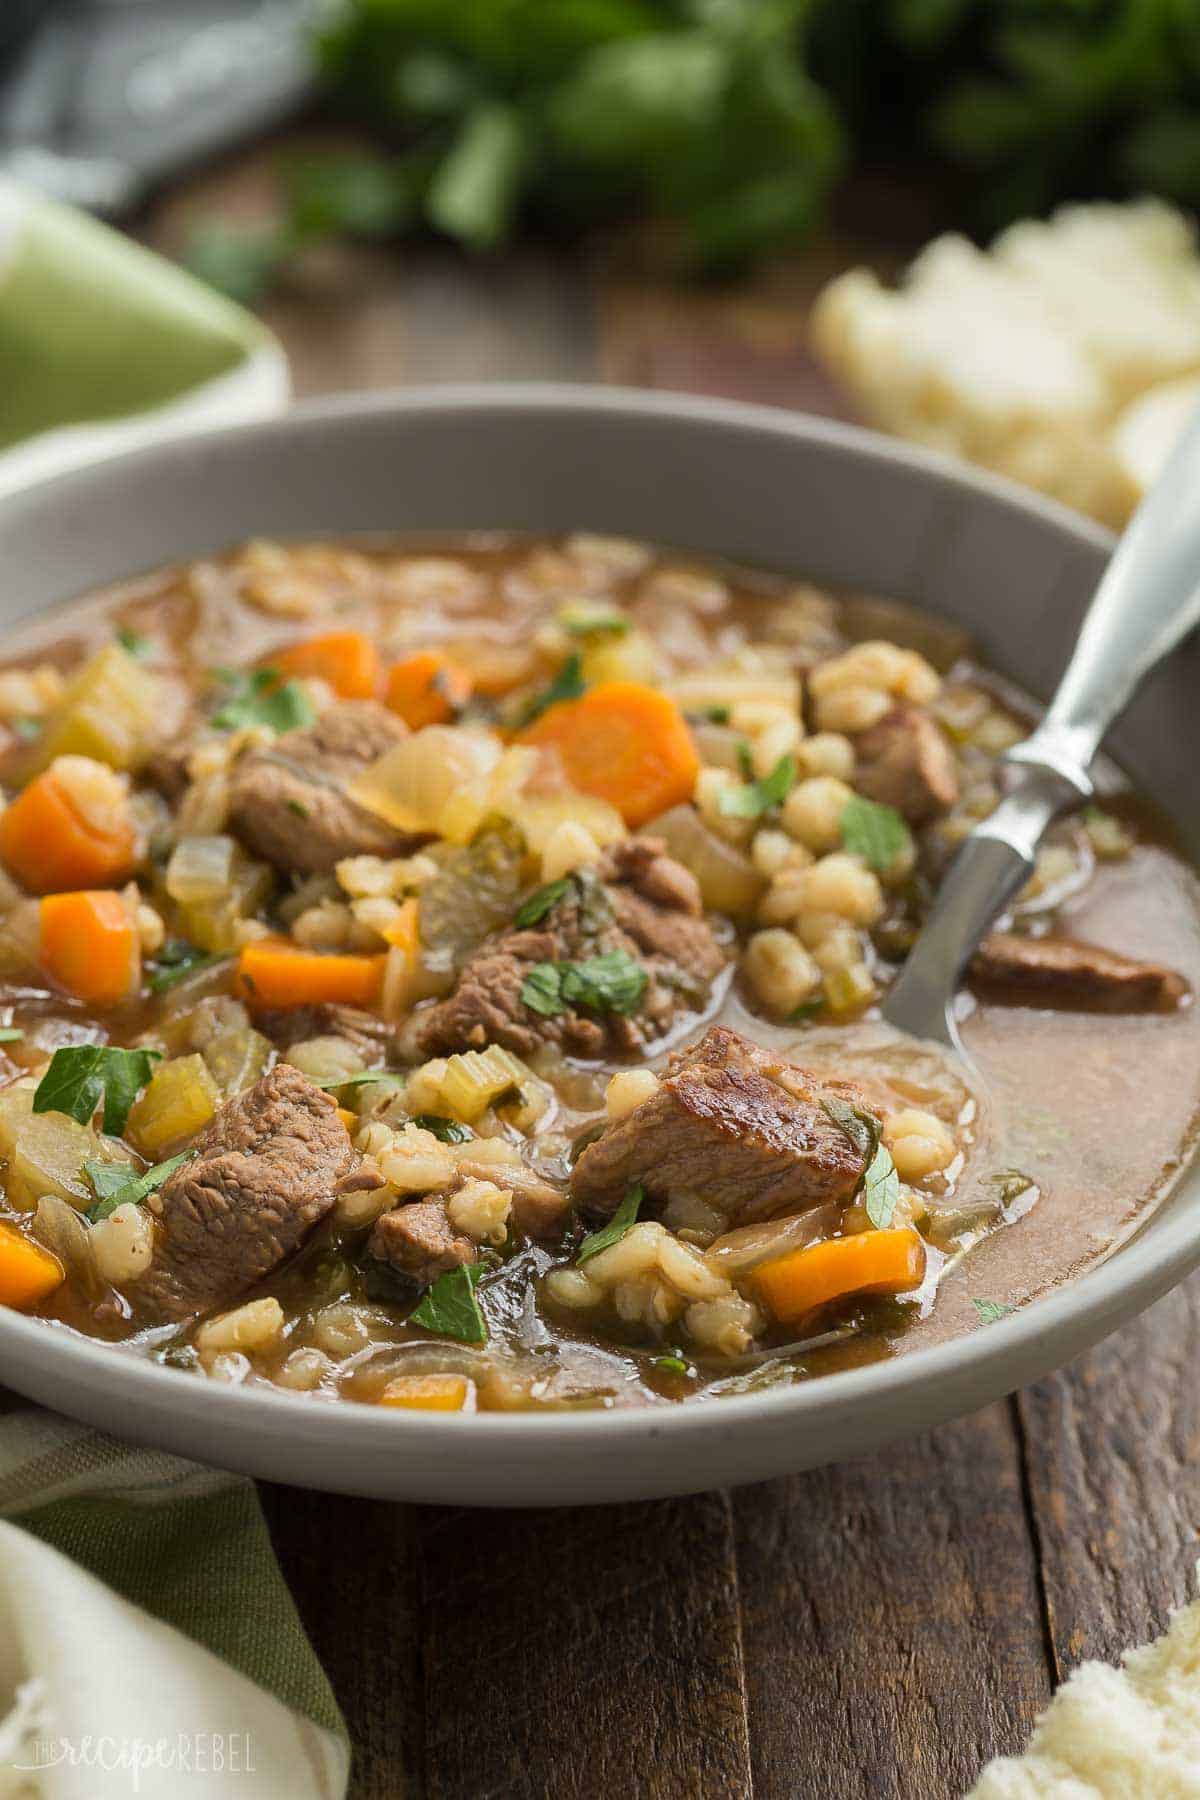 This Slow Cooker Beef Barley Soup is an easy crockpot meal perfect for fall or winter! Loaded with vegetables and tender chunks of beef. Includes step by step recipe video. | slow cooker recipe | crockpot recipe | beef stew | healthy dinner recipe | low calorie | high protein | #slowcooker #crockpot #slowcookerrecipe